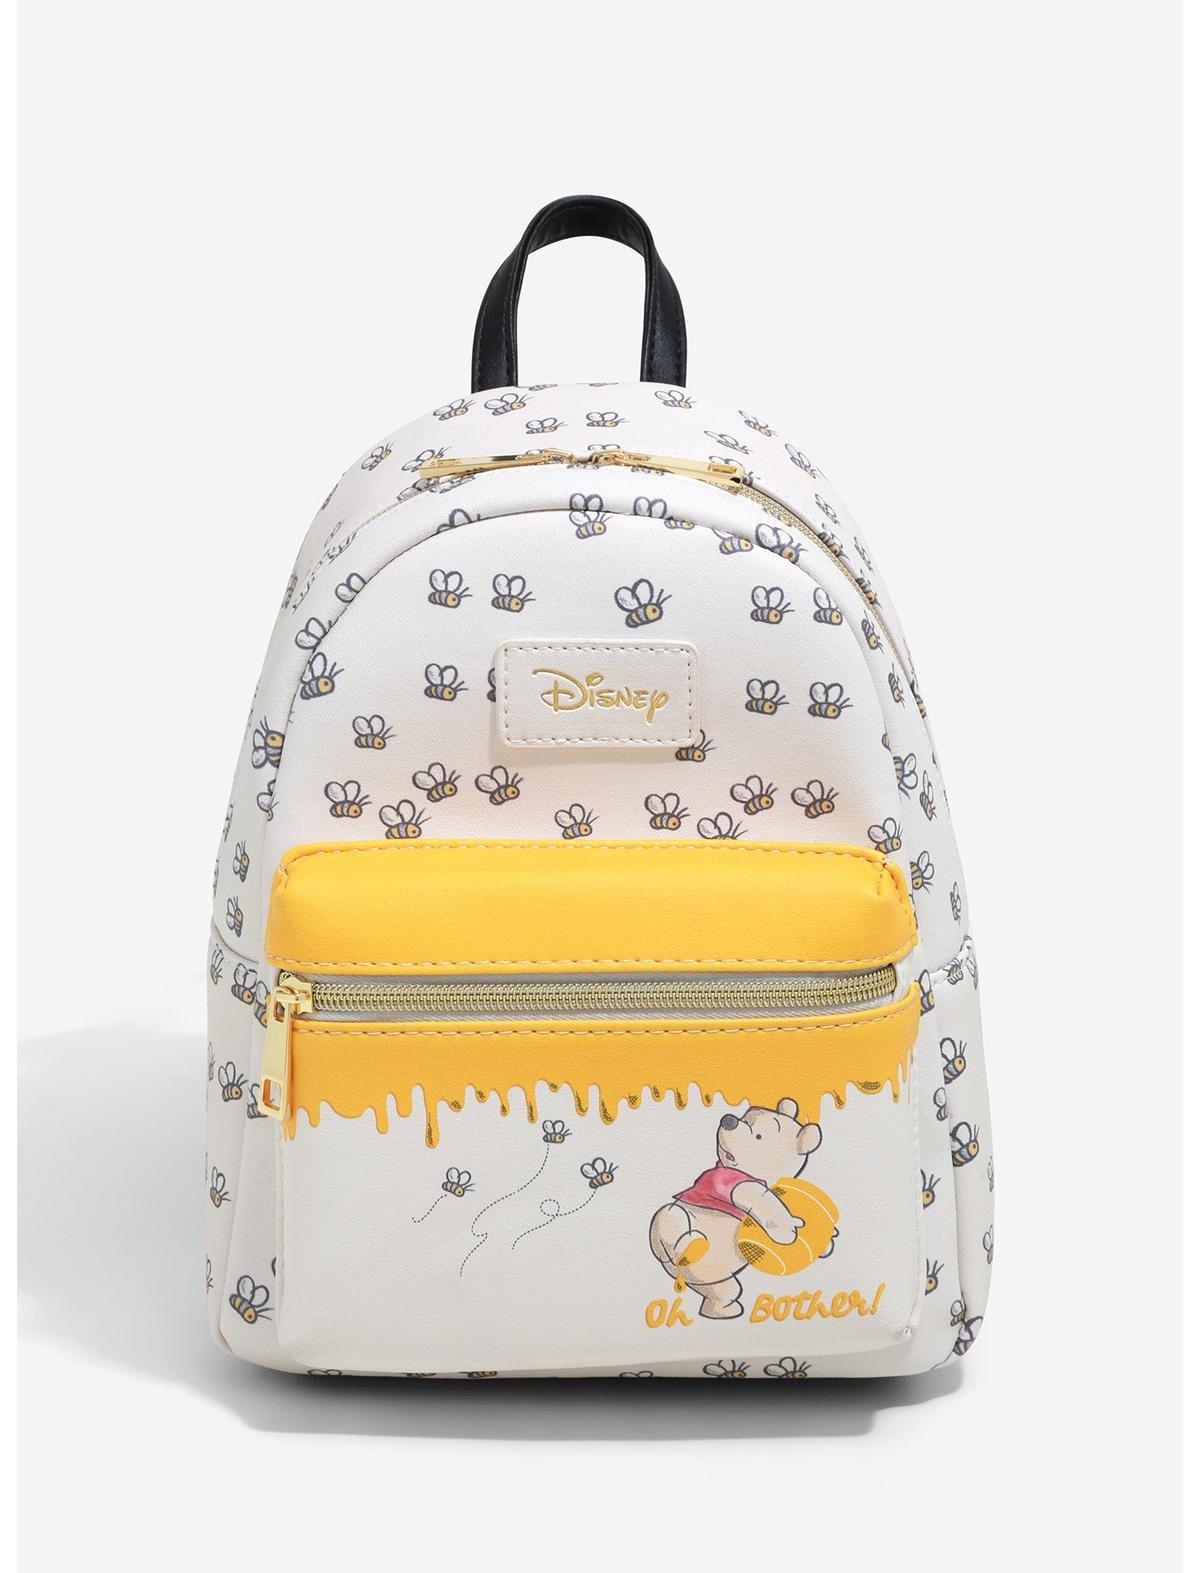 Loungefly Disney Winnie the Pooh Bees Allover Print Handbag - BoxLunch  Exclusive